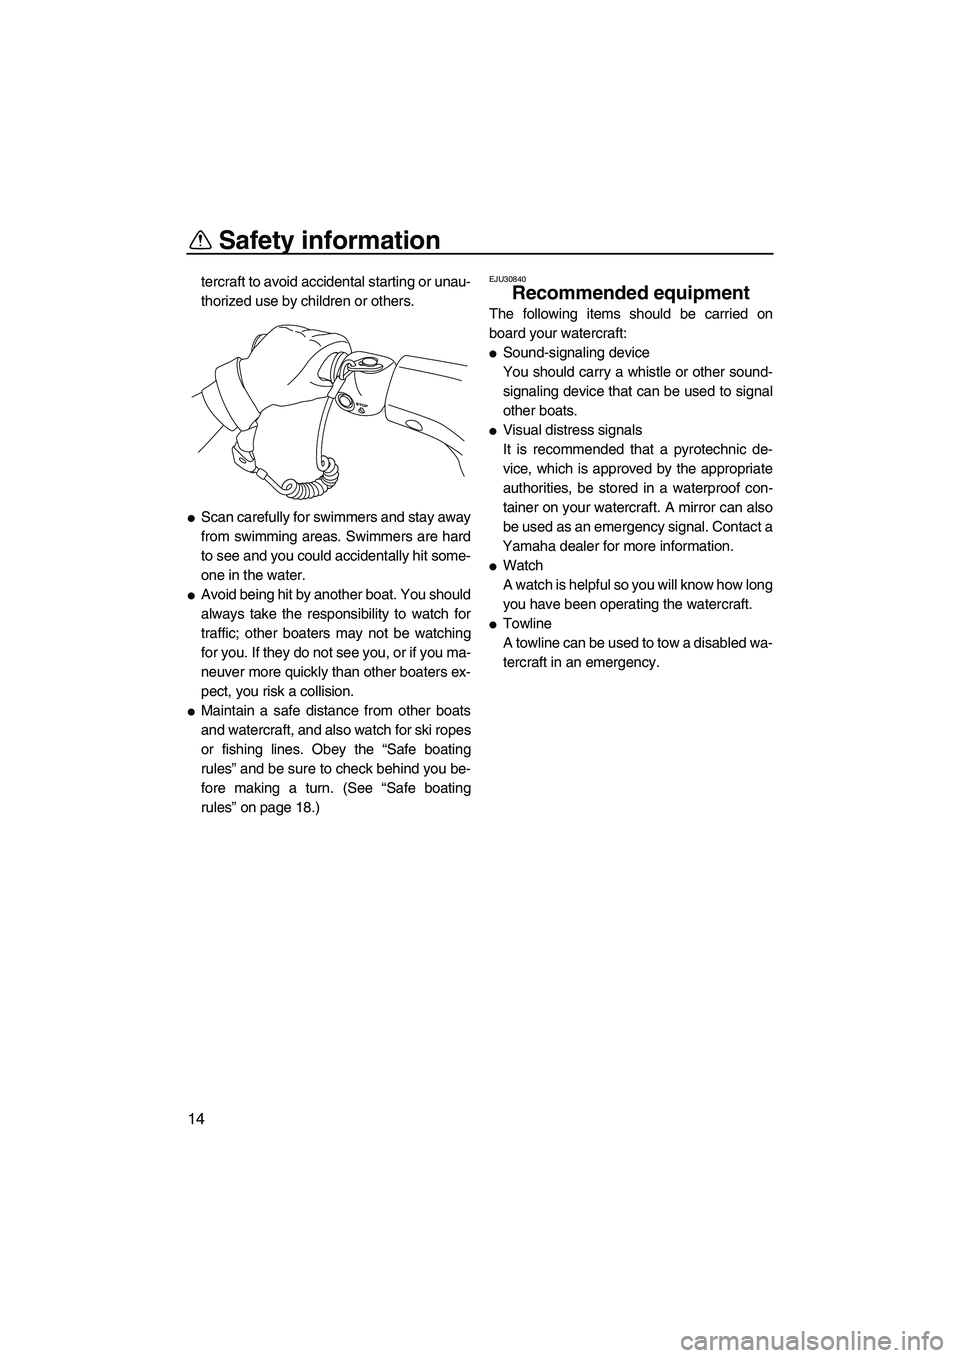 YAMAHA VX DELUXE 2012  Owners Manual Safety information
14
tercraft to avoid accidental starting or unau-
thorized use by children or others.
Scan carefully for swimmers and stay away
from swimming areas. Swimmers are hard
to see and yo